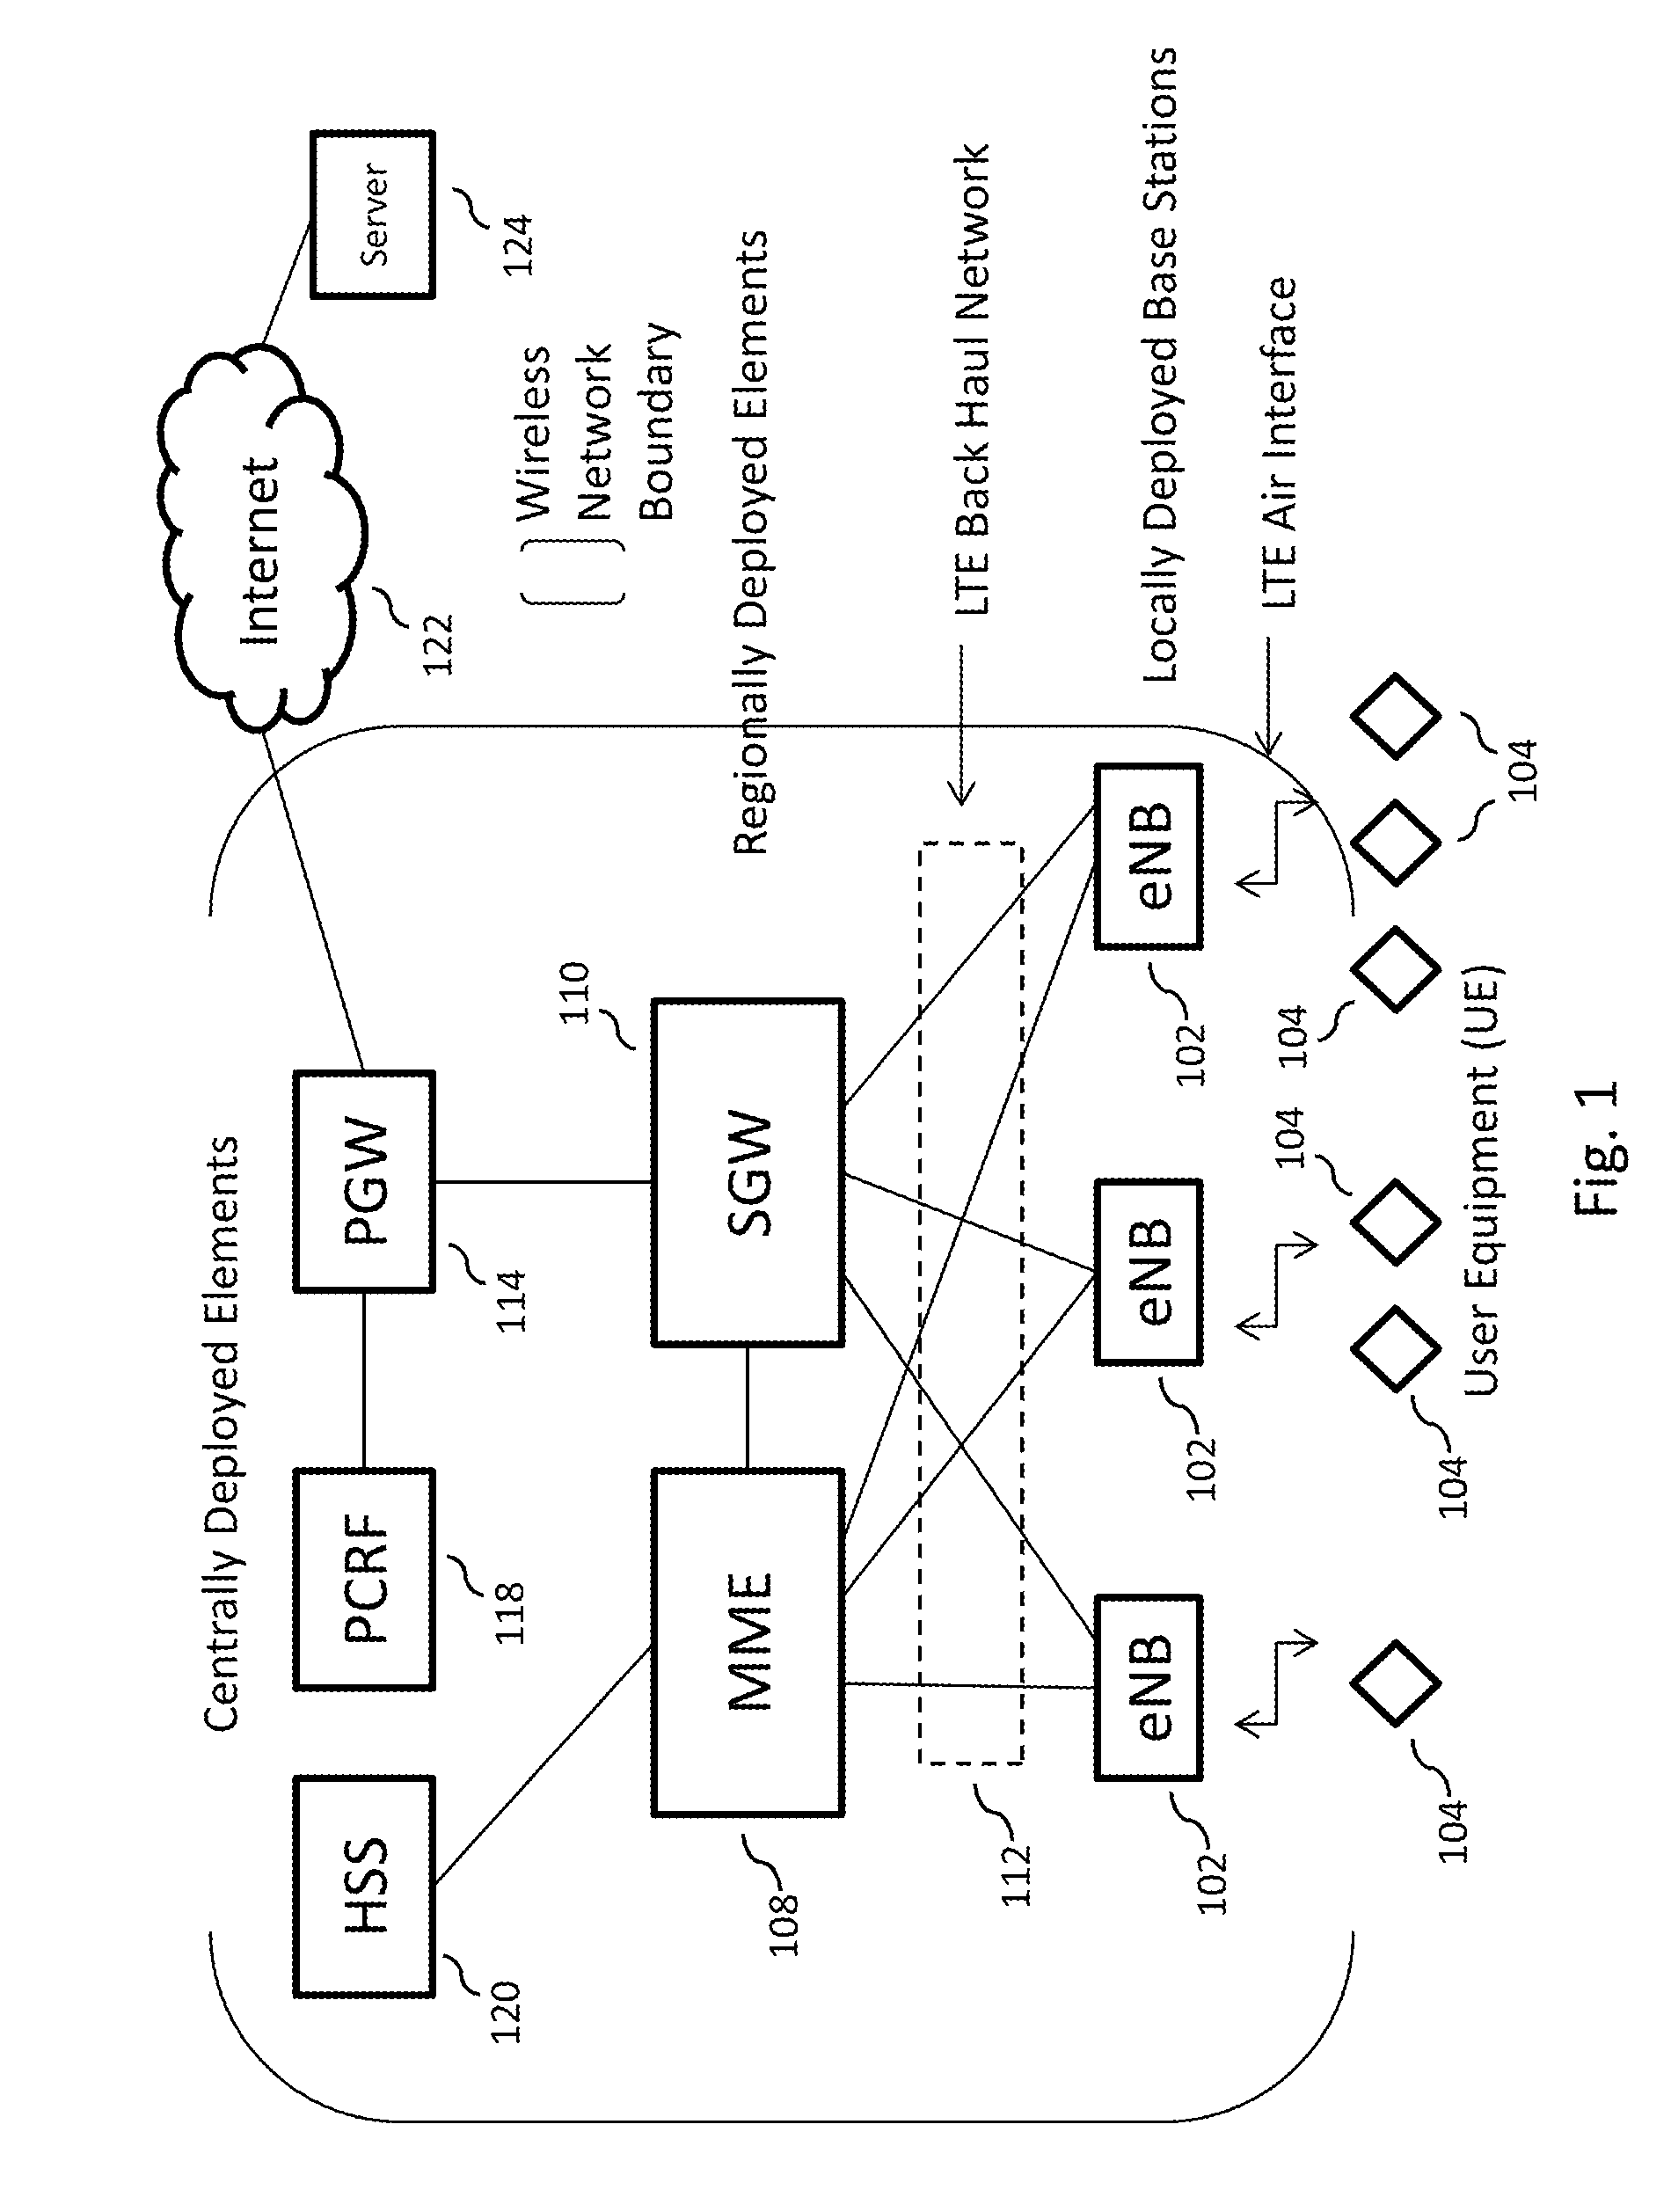 Efficient delivery of real-time synchronous services over a wireless network